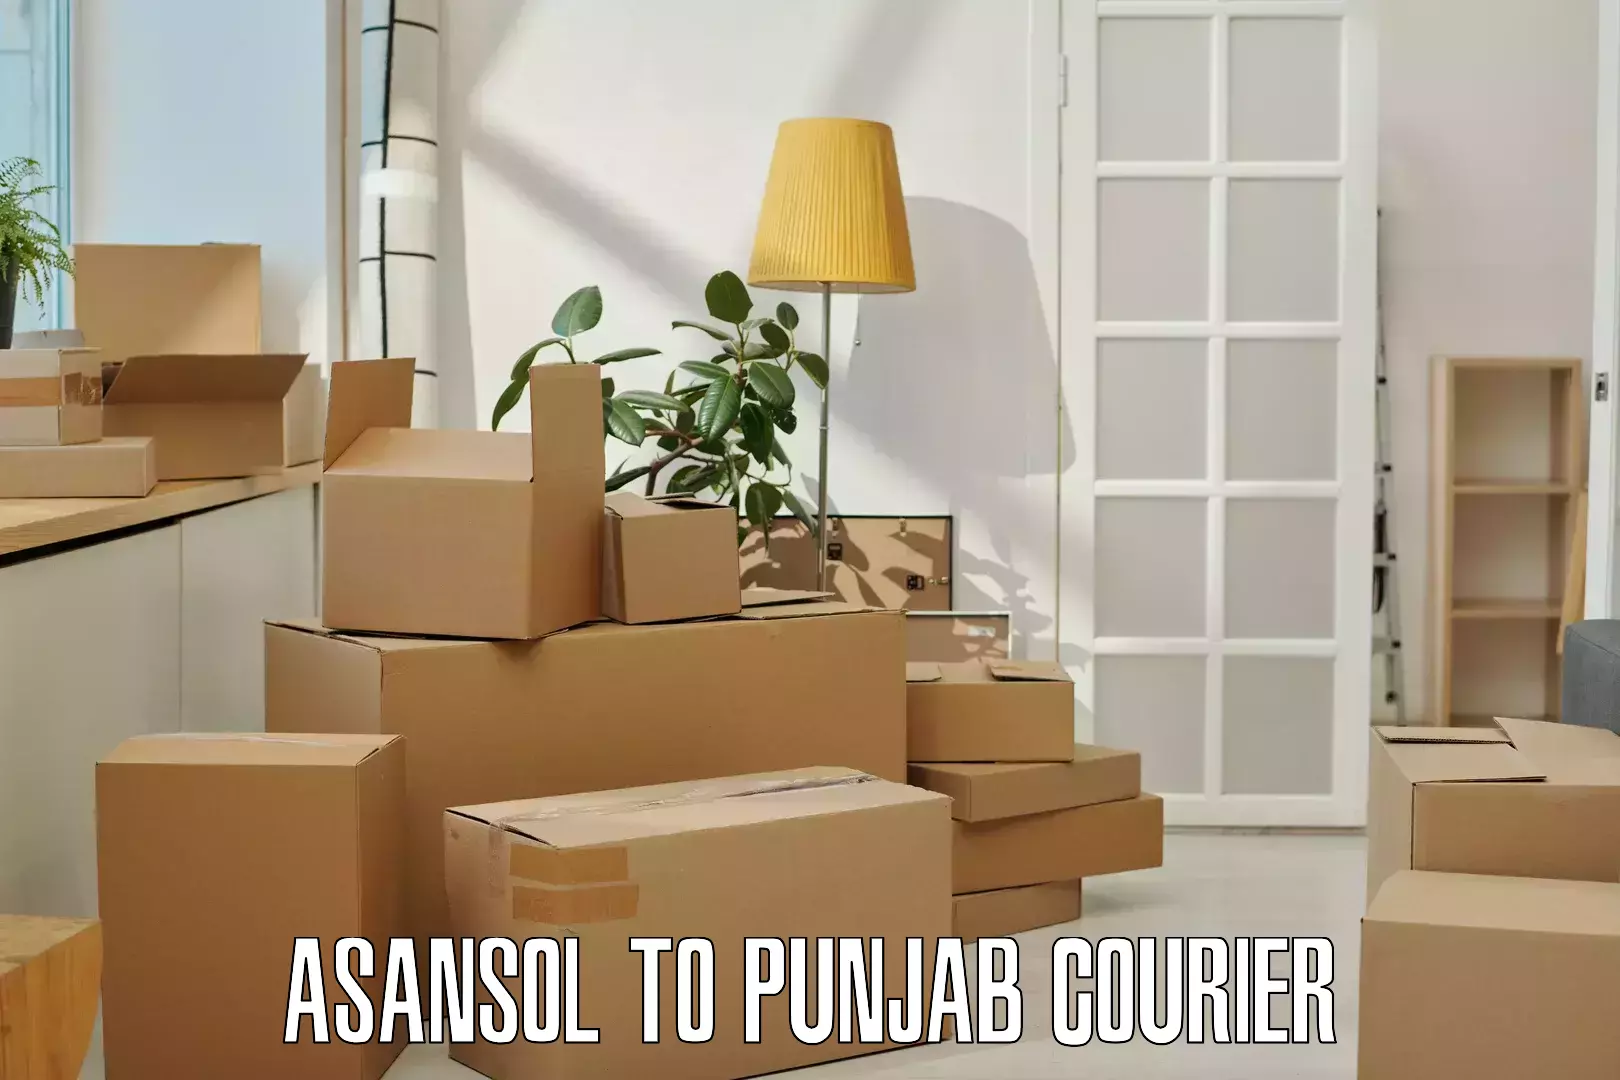 User-friendly courier app Asansol to Batala